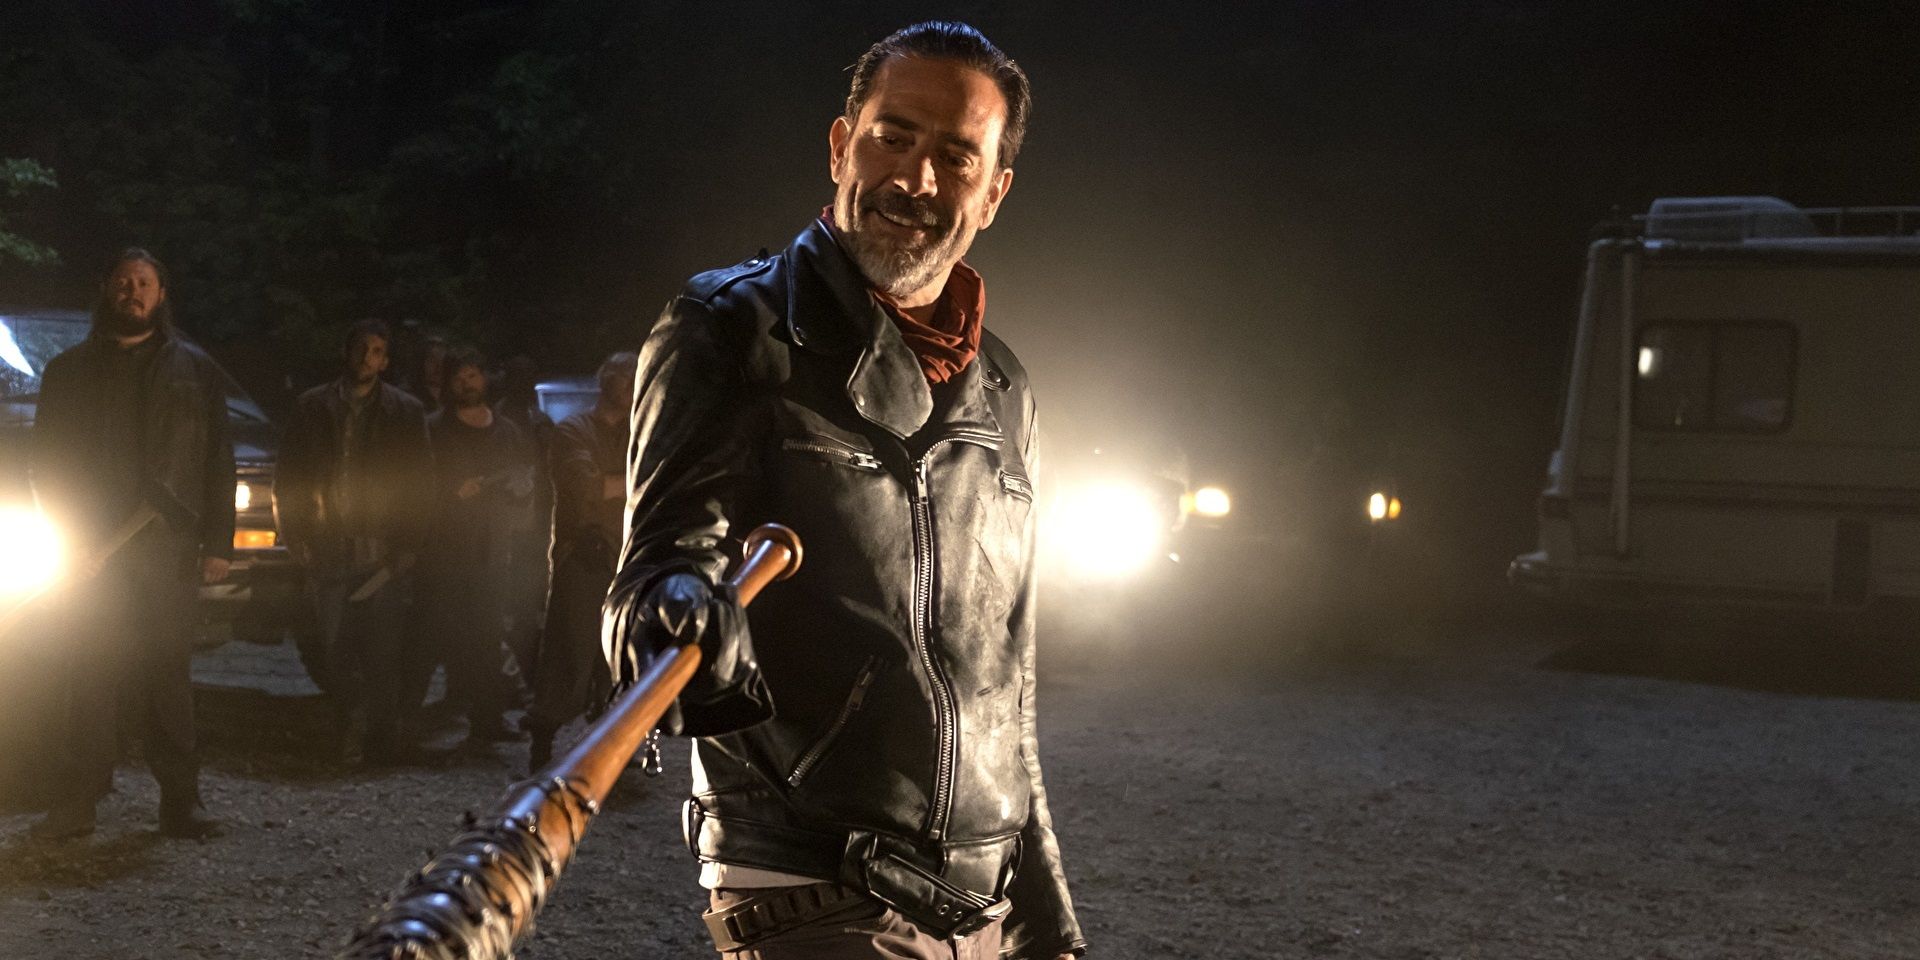 Negan smiling with a bat in The Walking Dead